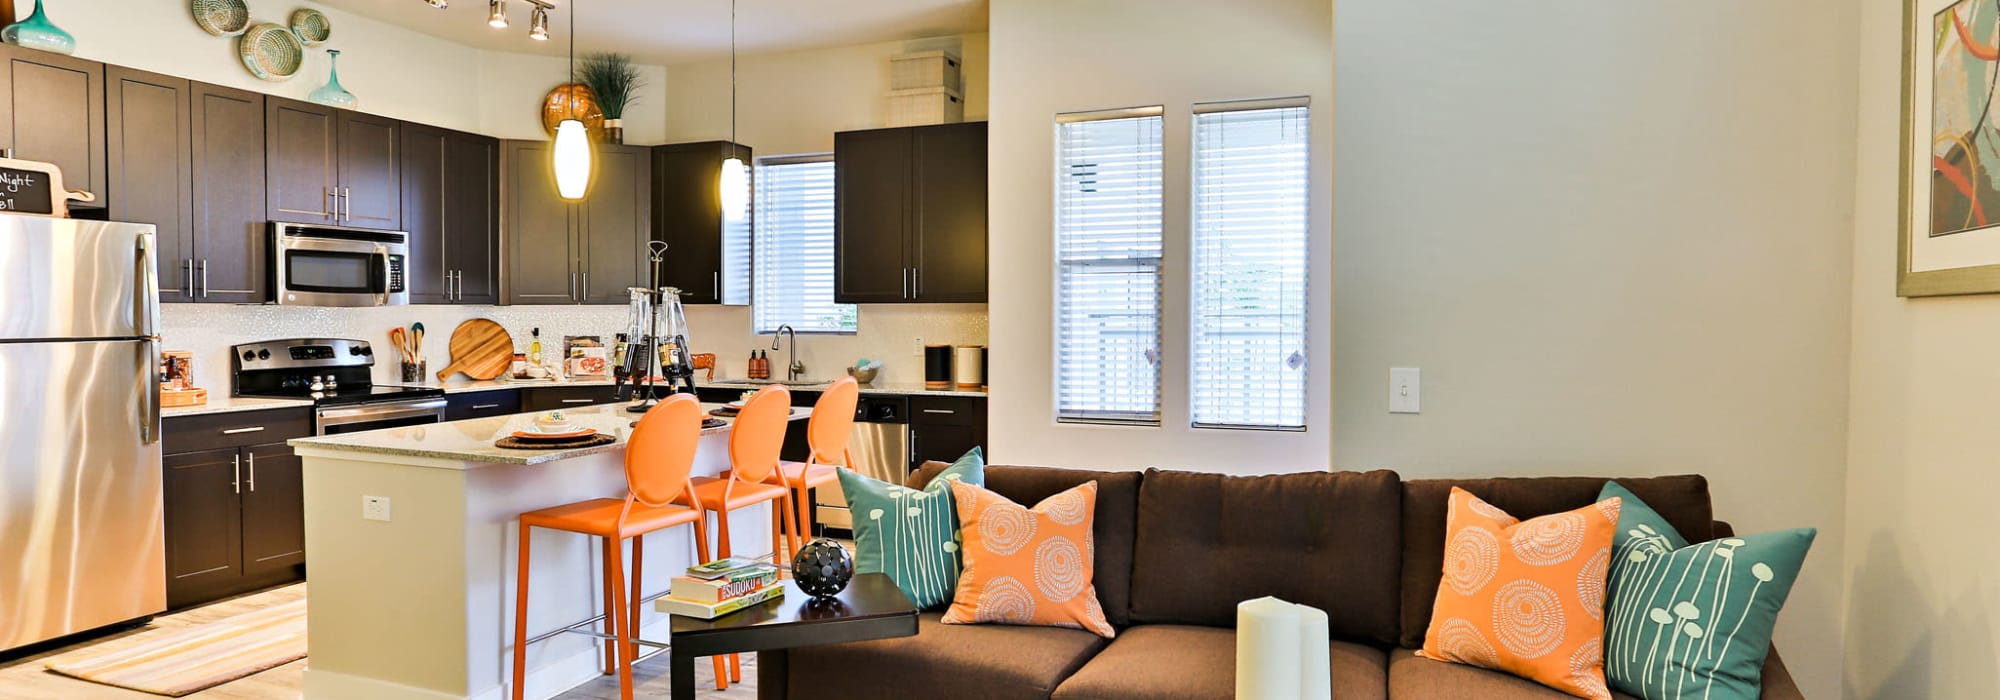 The Hyve | Apartments in Tempe, Arizona